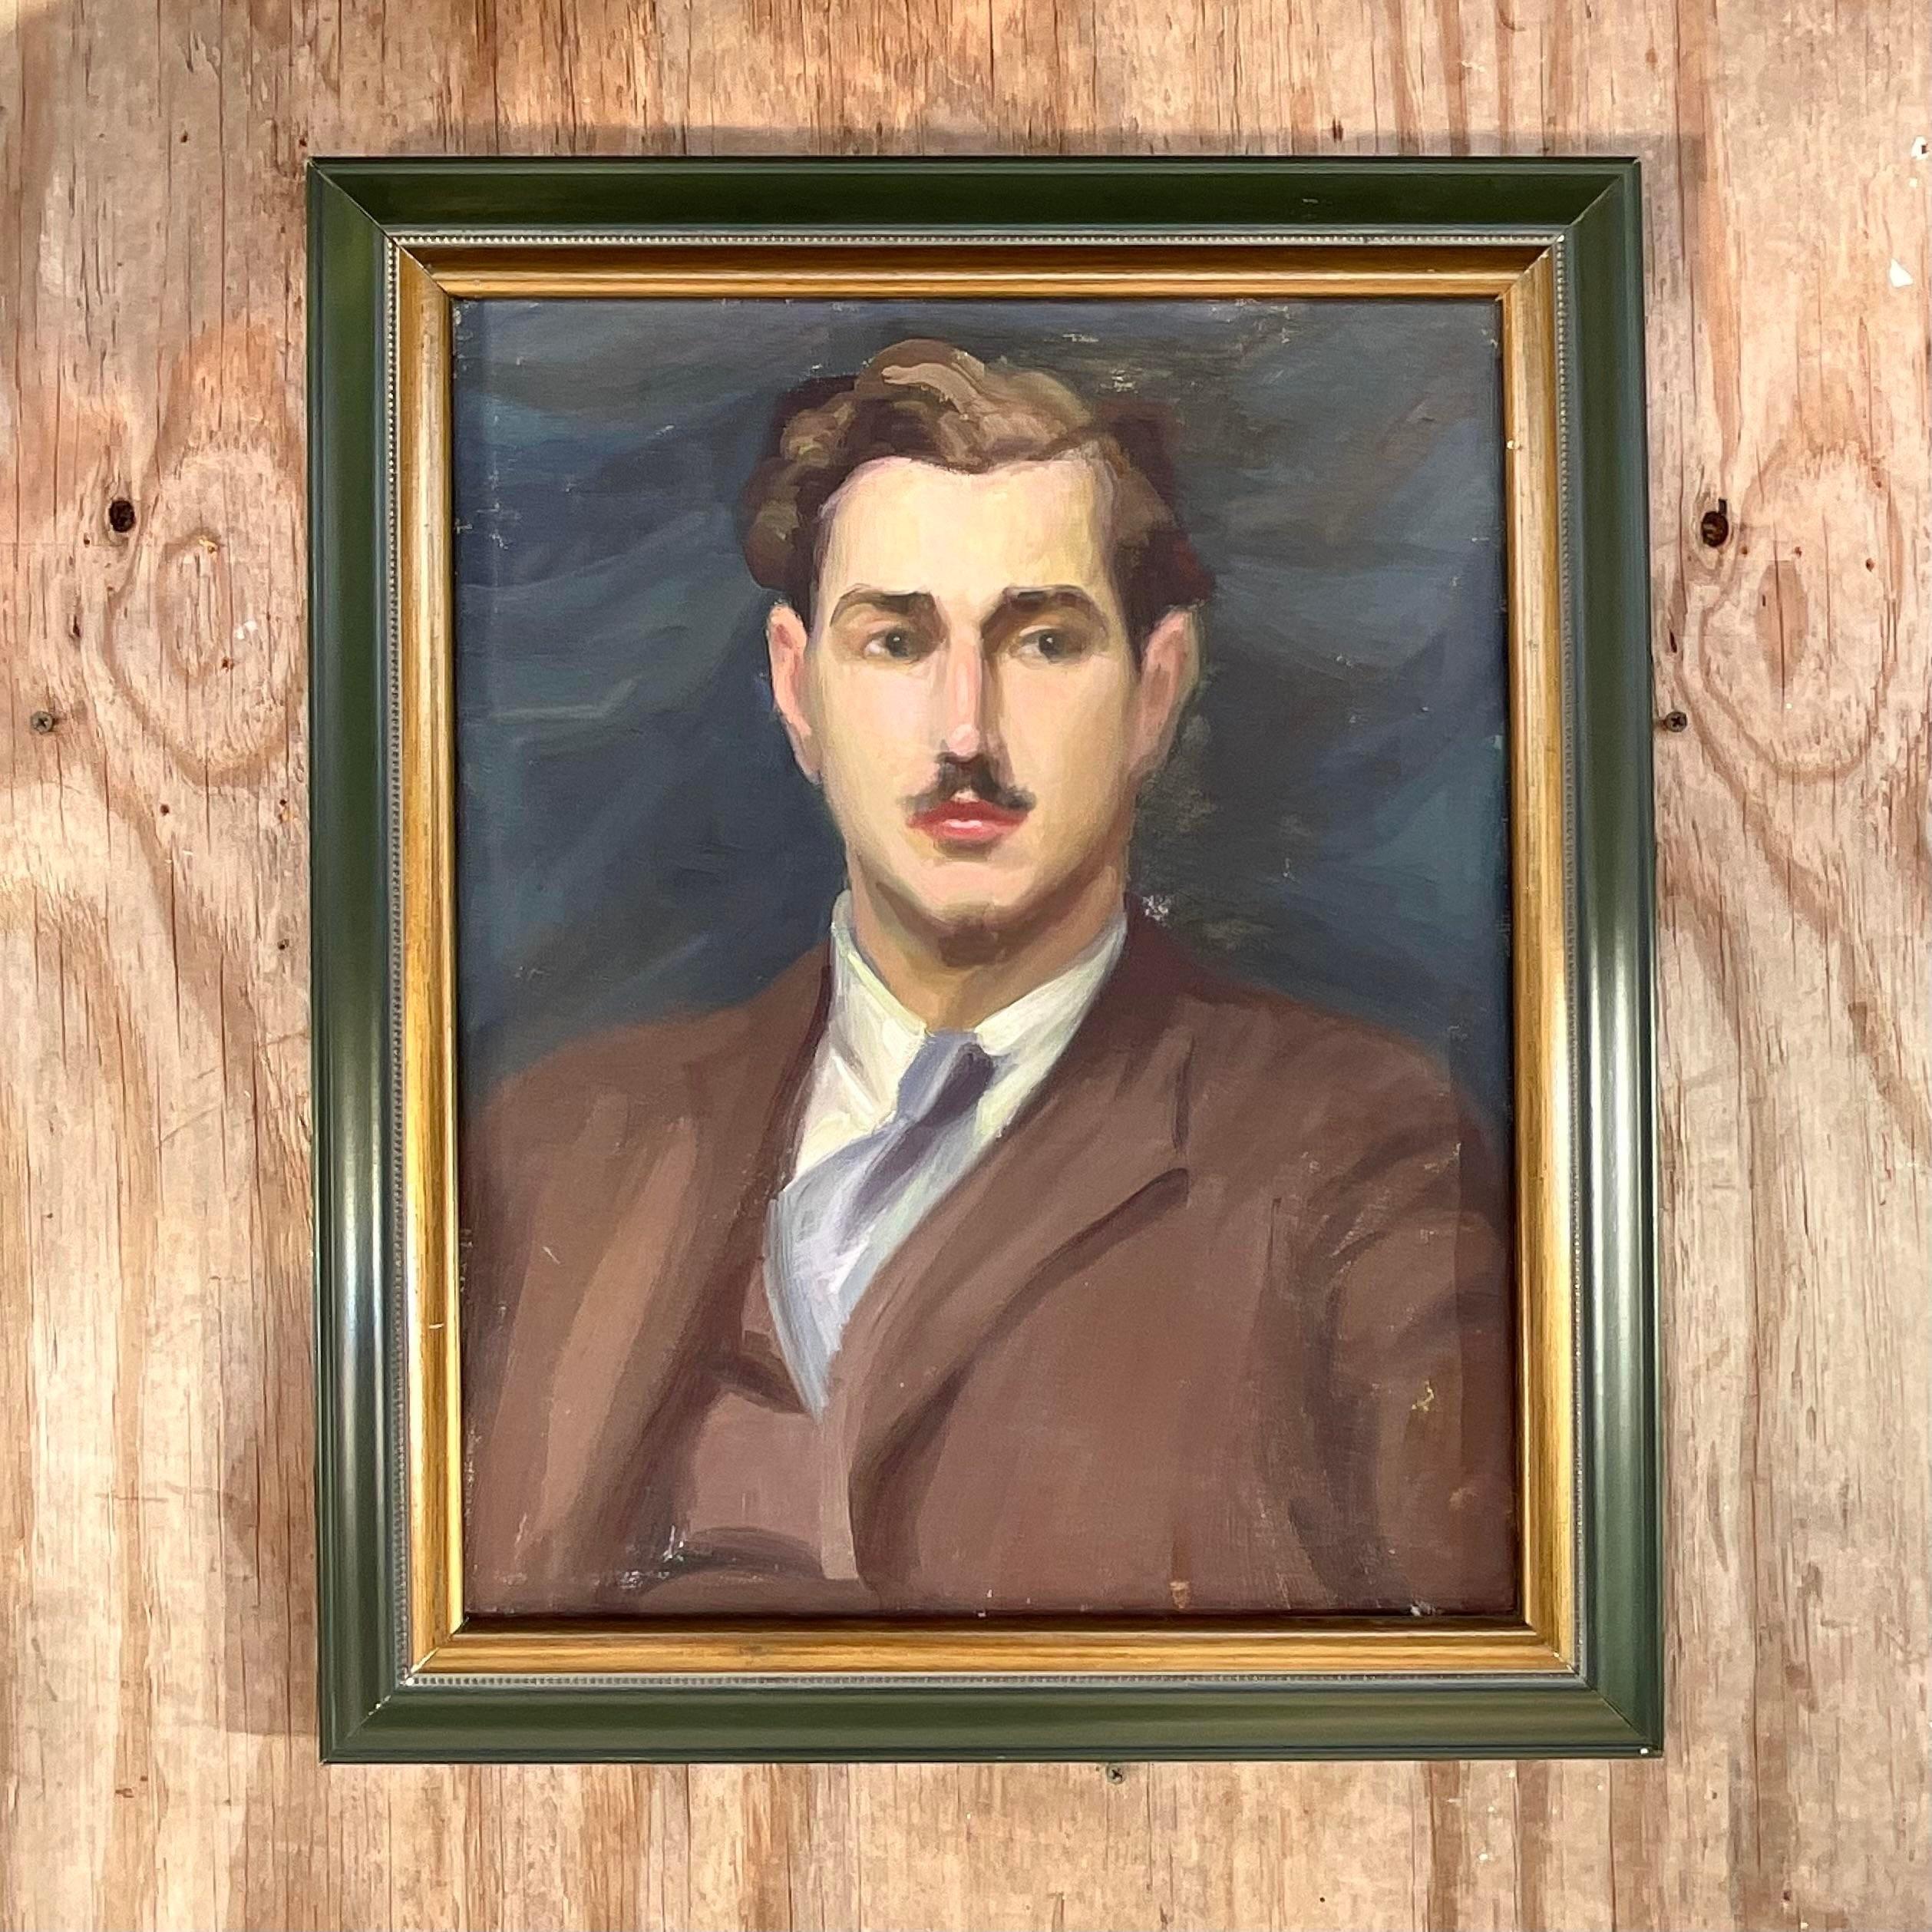 A fantastic vintage Boho original oil portrait on canvas. A chic composition of a handsome young man. A deep hunter green and gold frame. Acquired from a Palm Beach estate. 